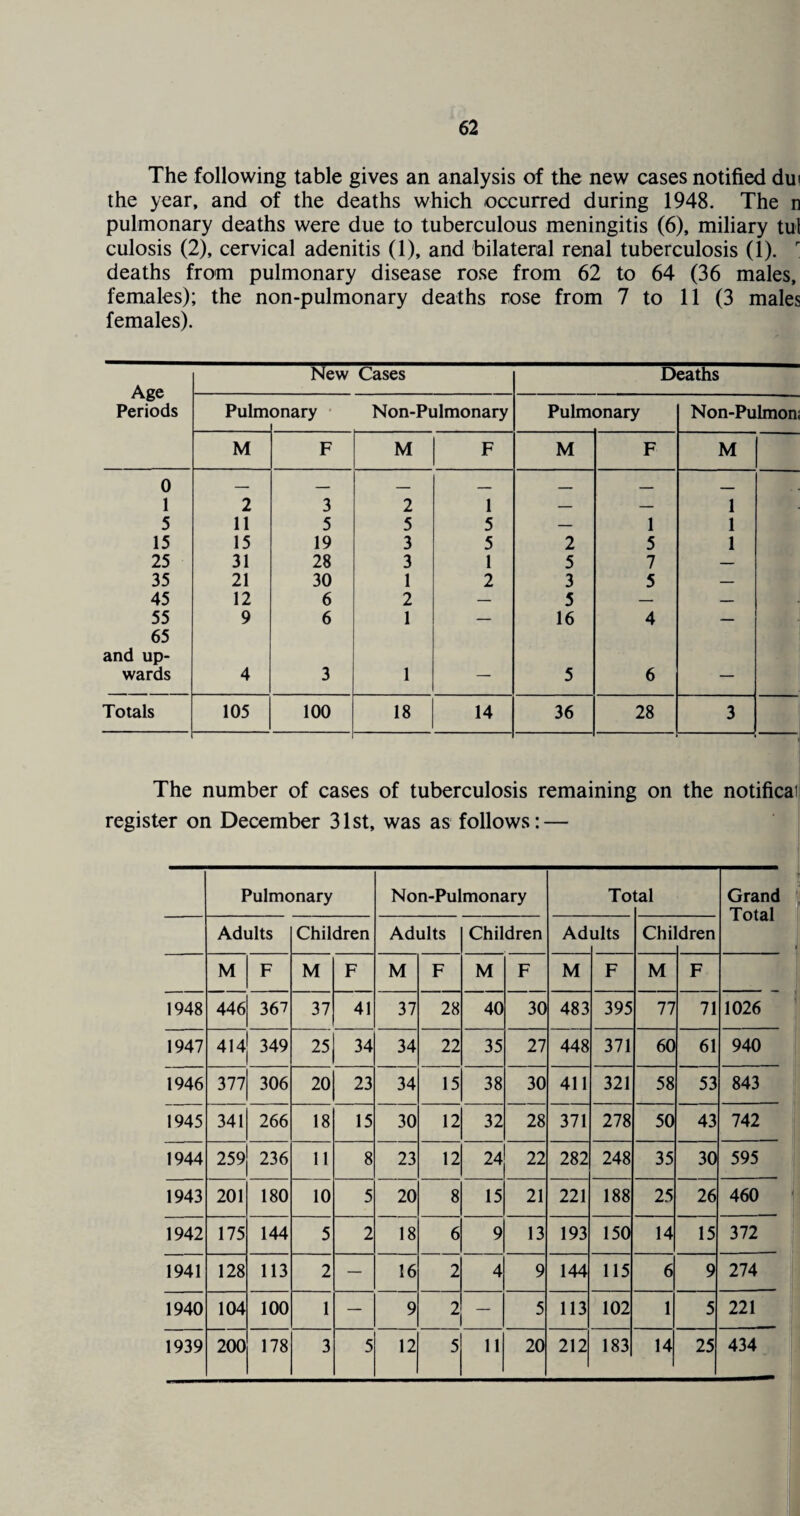 The following table gives an analysis of the new cases notified dut the year, and of the deaths which occurred during 1948. The n pulmonary deaths were due to tuberculous meningitis (6), miliary tul culosis (2), cervical adenitis (1), and bilateral renal tuberculosis (1). r deaths from pulmonary disease rose from 62 to 64 (36 males, females); the non-pulmonary deaths rose from 7 to 11 (3 males females). New Cases Deaths Age Periods Pulm onary Non-Pulmonary Pulm< 3nary Non-Pulmon; M F M F M F M 0 1 2 3 2 1 — — 1 5 11 5 5 5 — 1 1 15 15 19 3 5 2 5 1 25 31 28 3 1 5 7 — 35 21 30 1 2 3 5 — 45 12 6 2 — 5 — — 55 9 6 1 — 16 4 — 65 and up- wards 4 3 1 — 5 6 — Totals 105 100 18 14 36 28 3 The number of cases of tuberculosis remaining on the notificai register on December 31st, was as follows: — Pulmonary Non-Pulmonary To tal Grand Total Adults Children Adults Children Ad ults Chi dren M F M F M F M F M F M F 1948 446 367 37 41 37 28 40 30 483 395 77 71 1026 1947 414 349 25 34 34 22 35 27 448 371 60 61 940 1946 377 306 20 23 34 15 38 30 411 321 58 53 843 1945 341 266 18 15 30 12 32 28 371 278 50 43 742 1944 259 236 11 8 23 12 24 22 282 248 35 30 595 1943 201 180 10 5 20 8 15 21 221 188 25 26 460 1942 175 144 5 2 18 6 9 13 193 150 14 15 372 1941 128 113 2 — 16 2 4 9 144 115 6 9 274 1940 104 100 1 — 9 2 — 5 113 102 1 5 221 1939 200 178 3 5 12 5 11 20 212 183 14 25 434